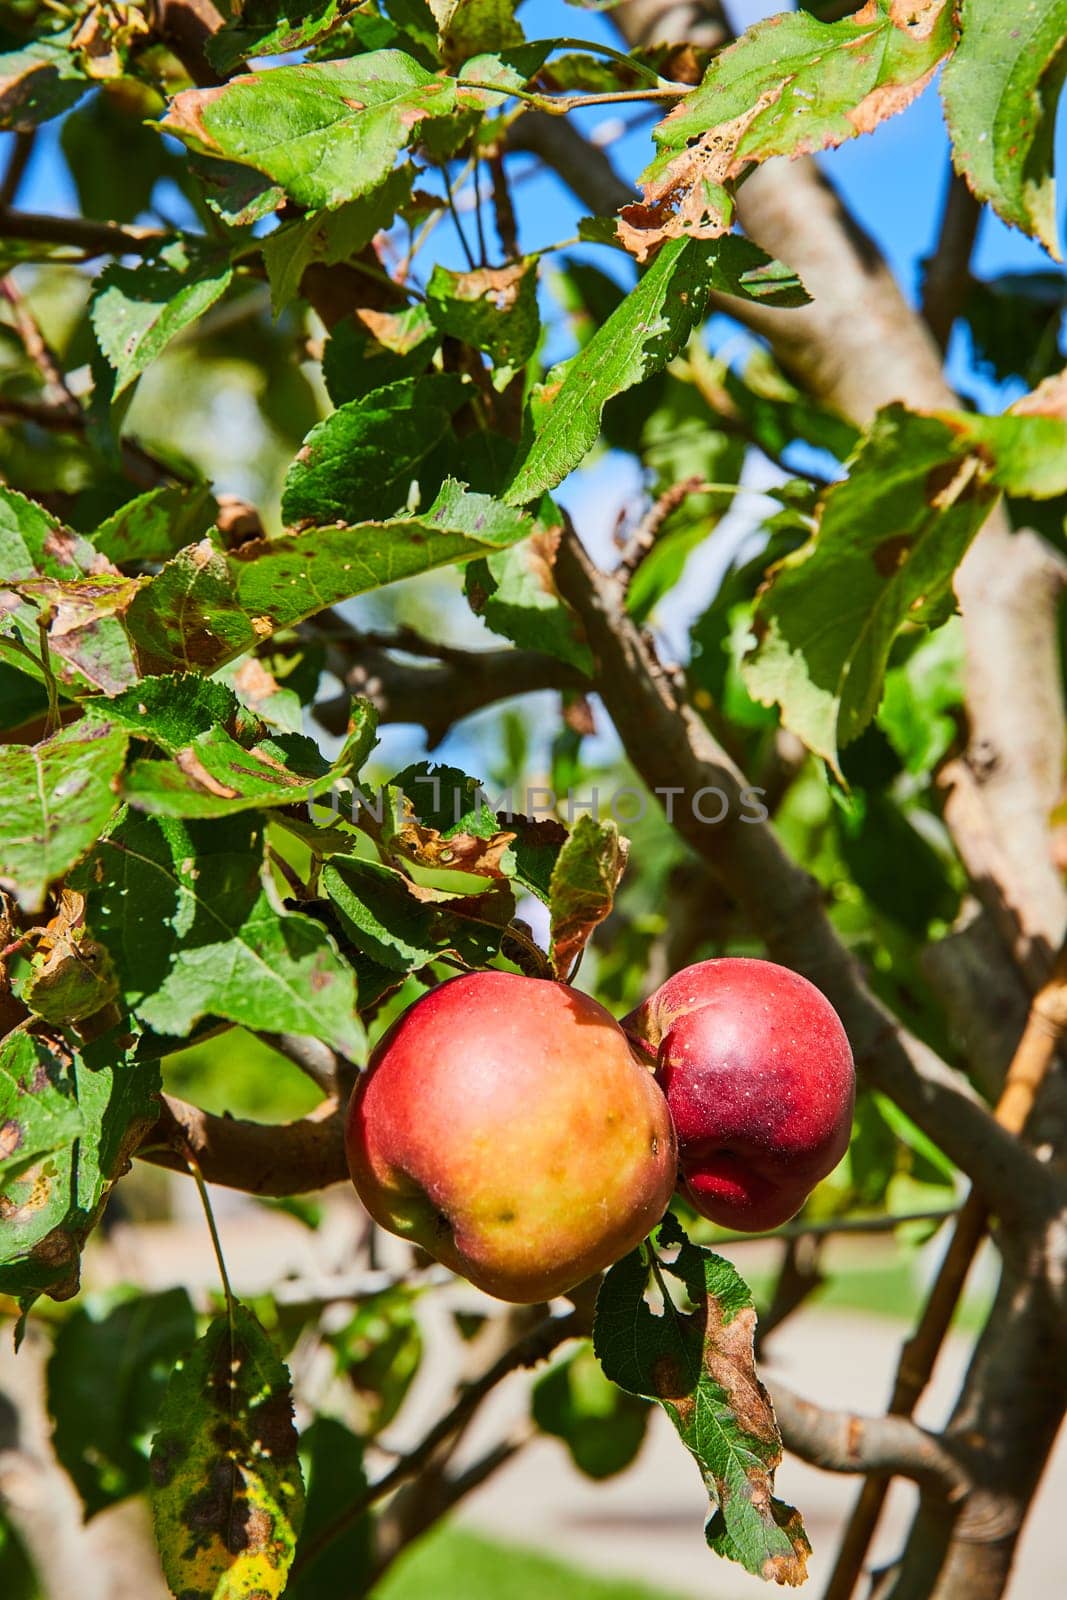 Ripe Apples on Branch in Sunlit Orchard, Eye-Level View by njproductions